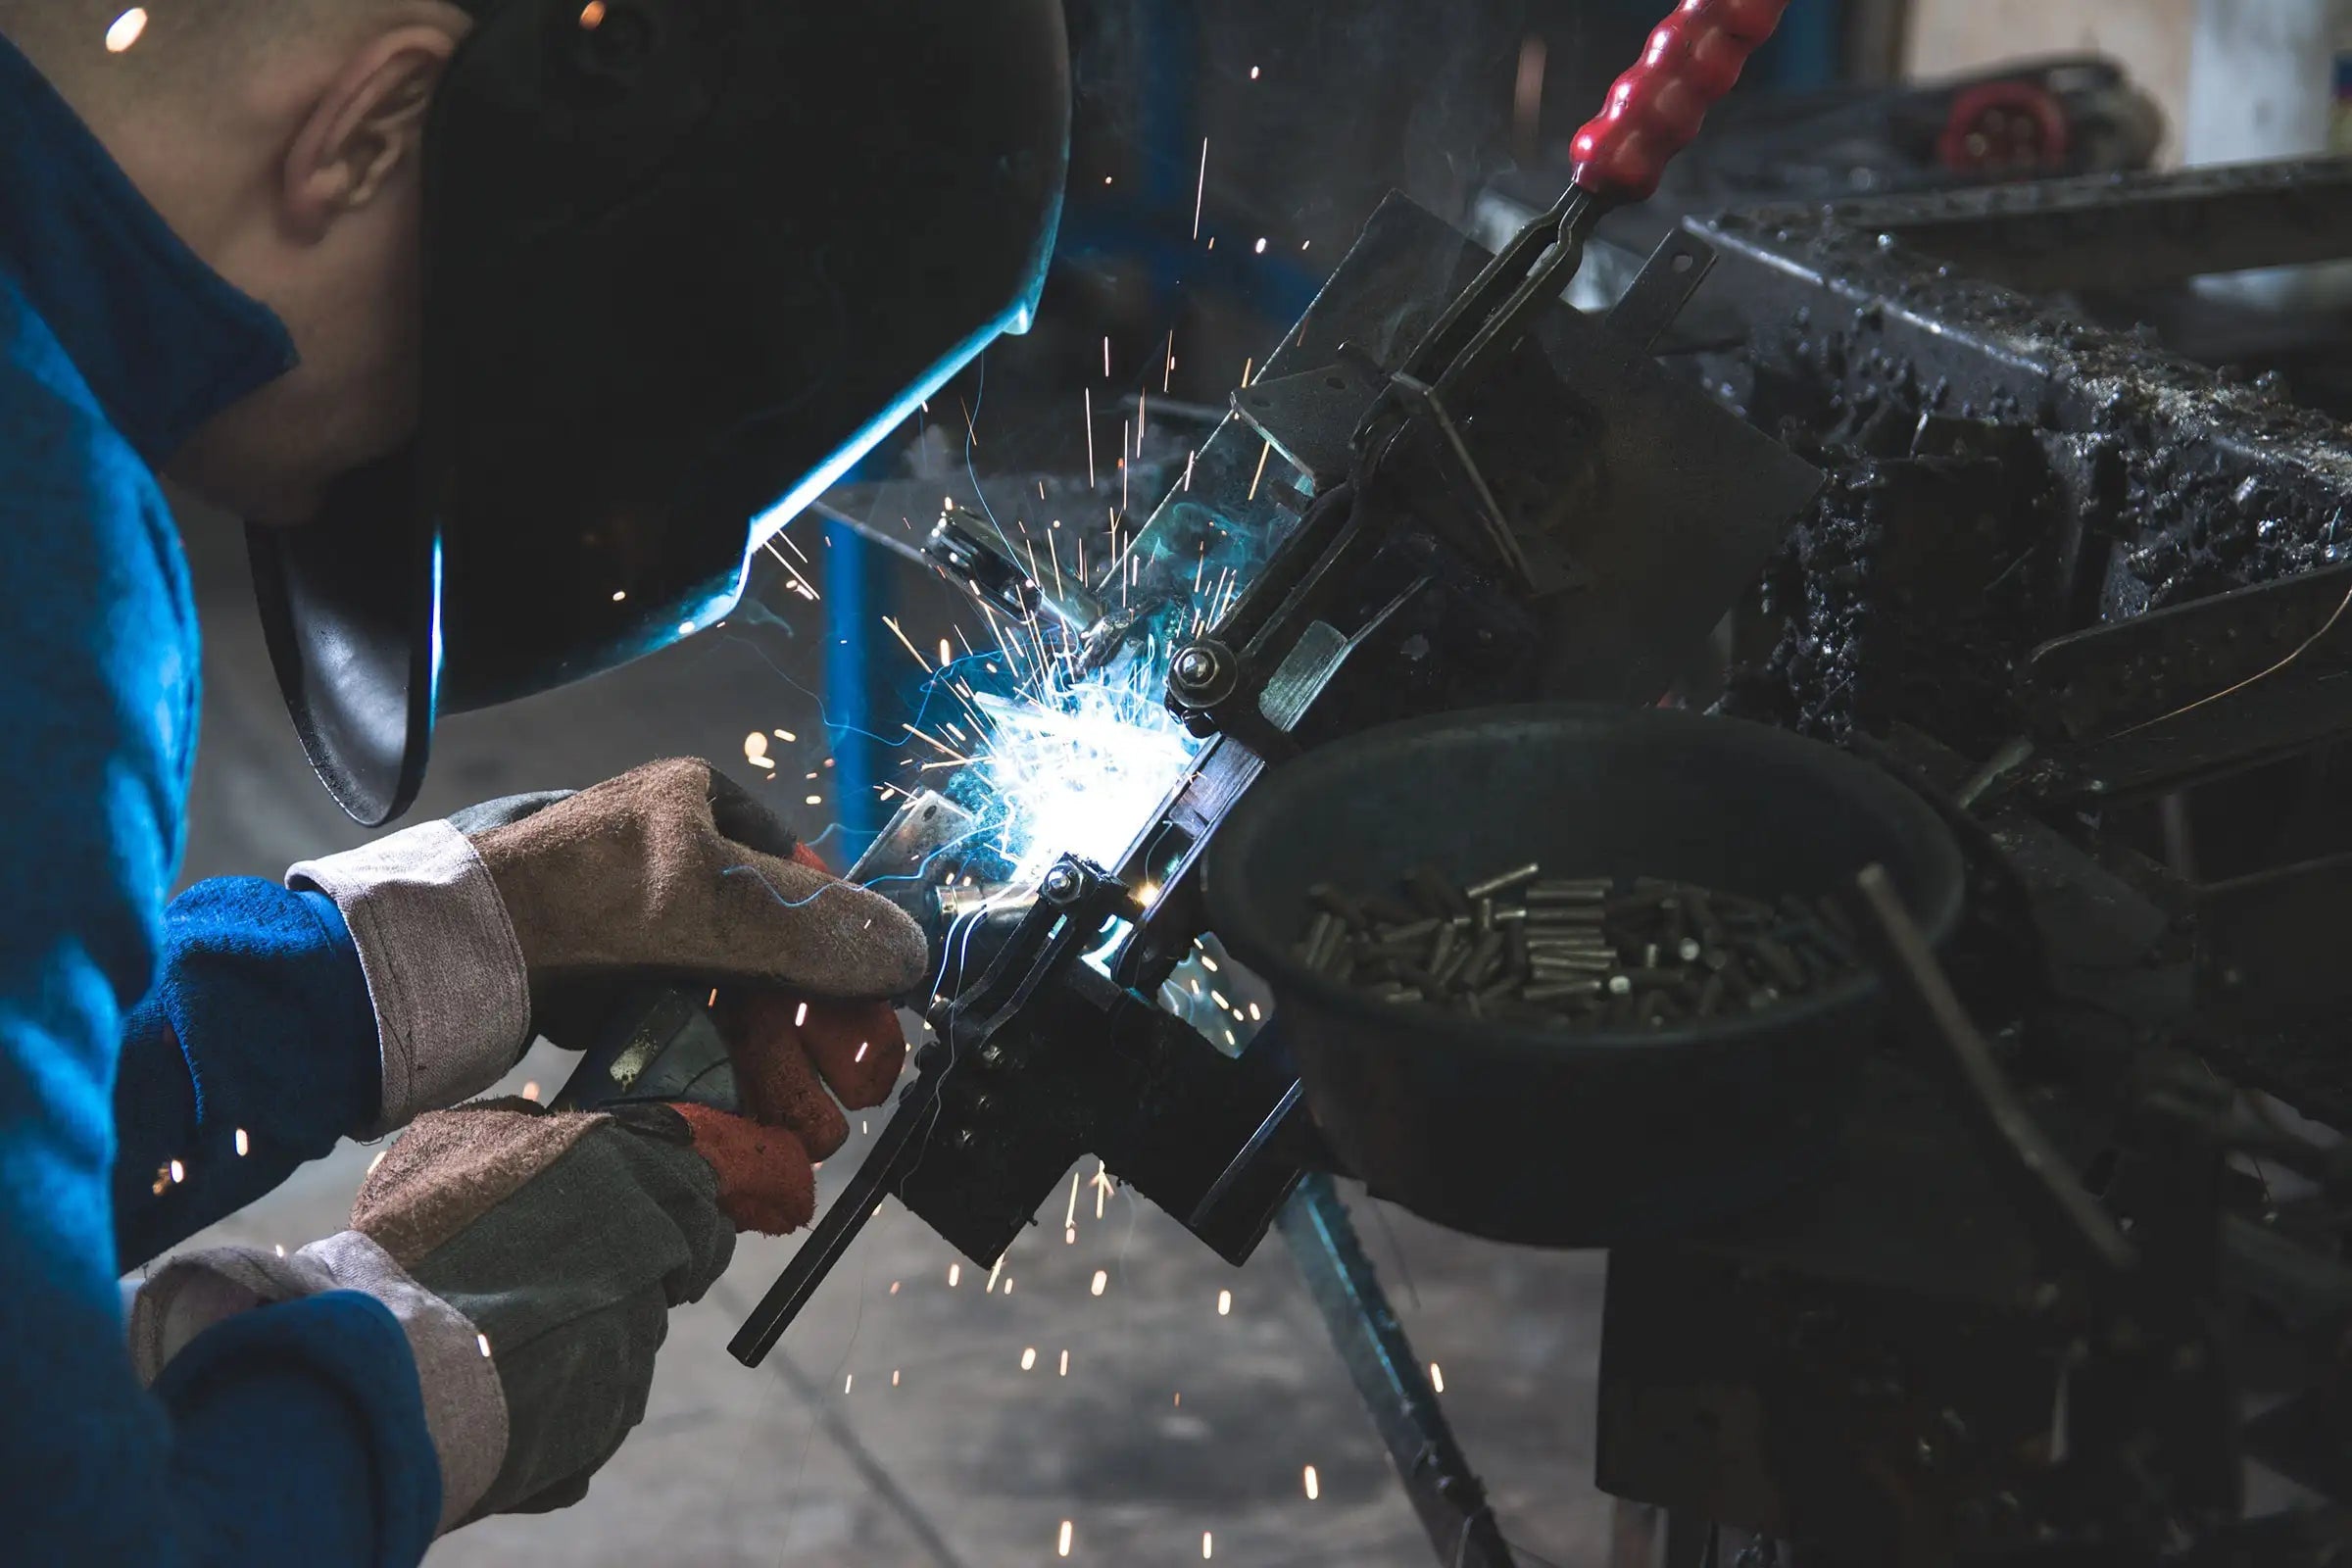 Close-up of a skilled worker welding metal parts in an industrial setting, with sparks flying around as he concentrates on his task, wearing protective gear including a helmet and gloves.